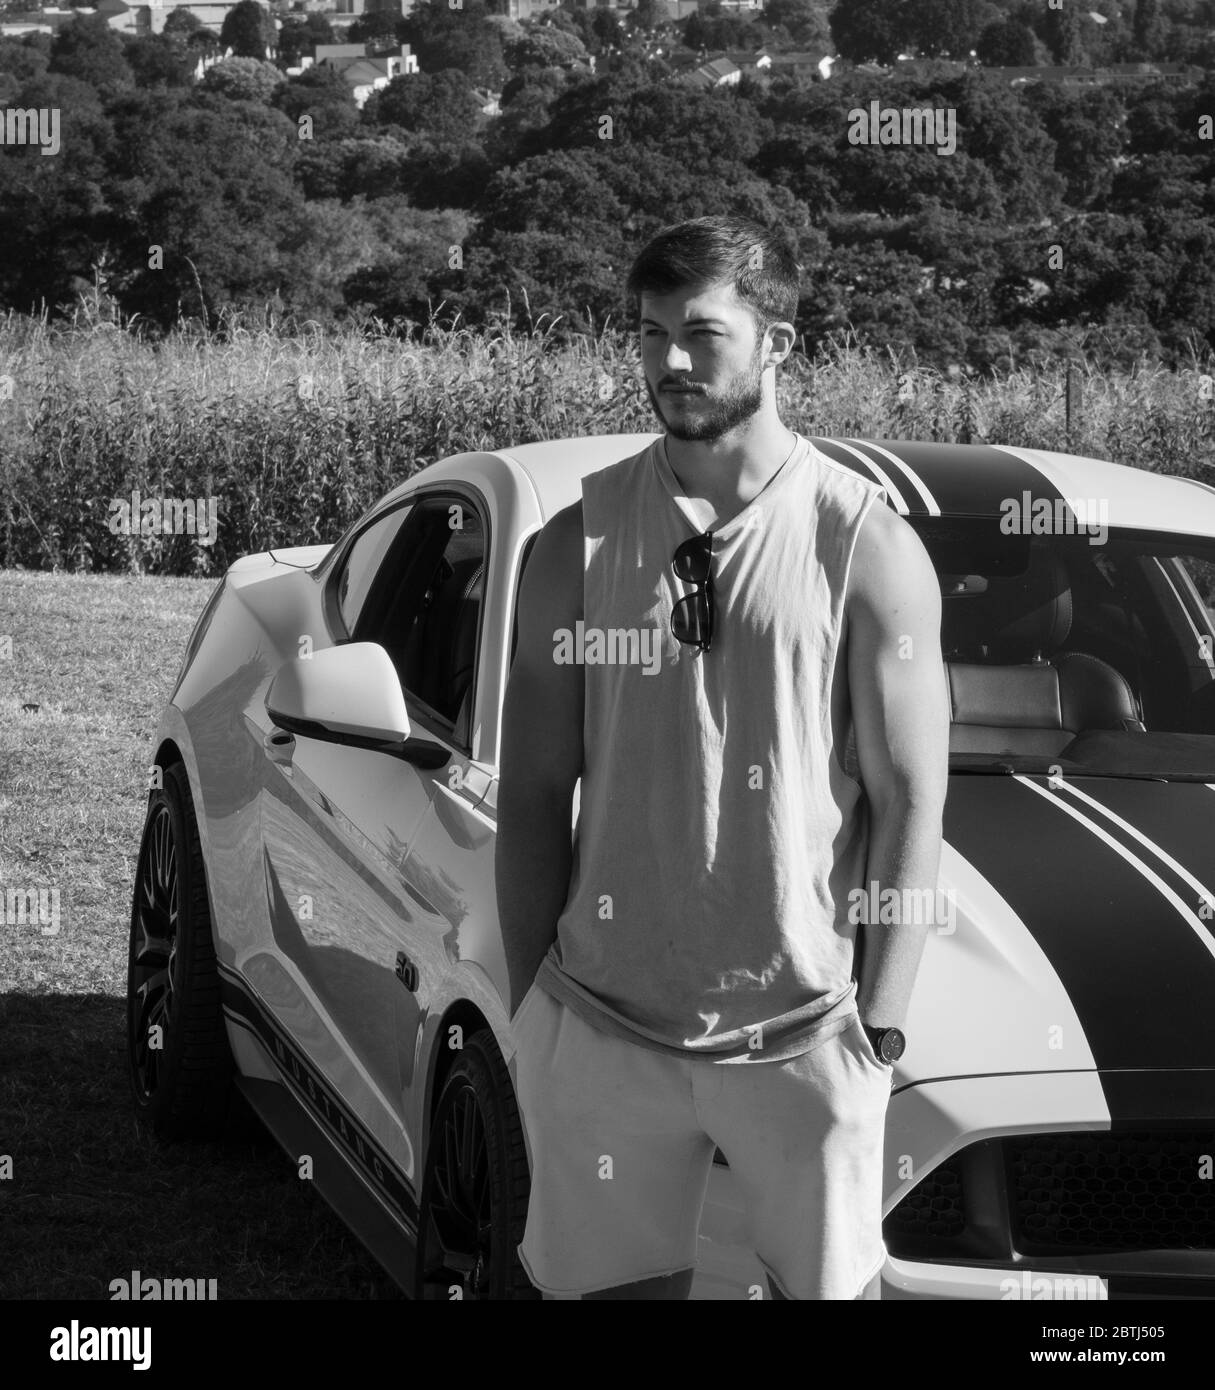 A young bearded muscular man poses with his Ford Mustang sports car, taken in black and white Stock Photo